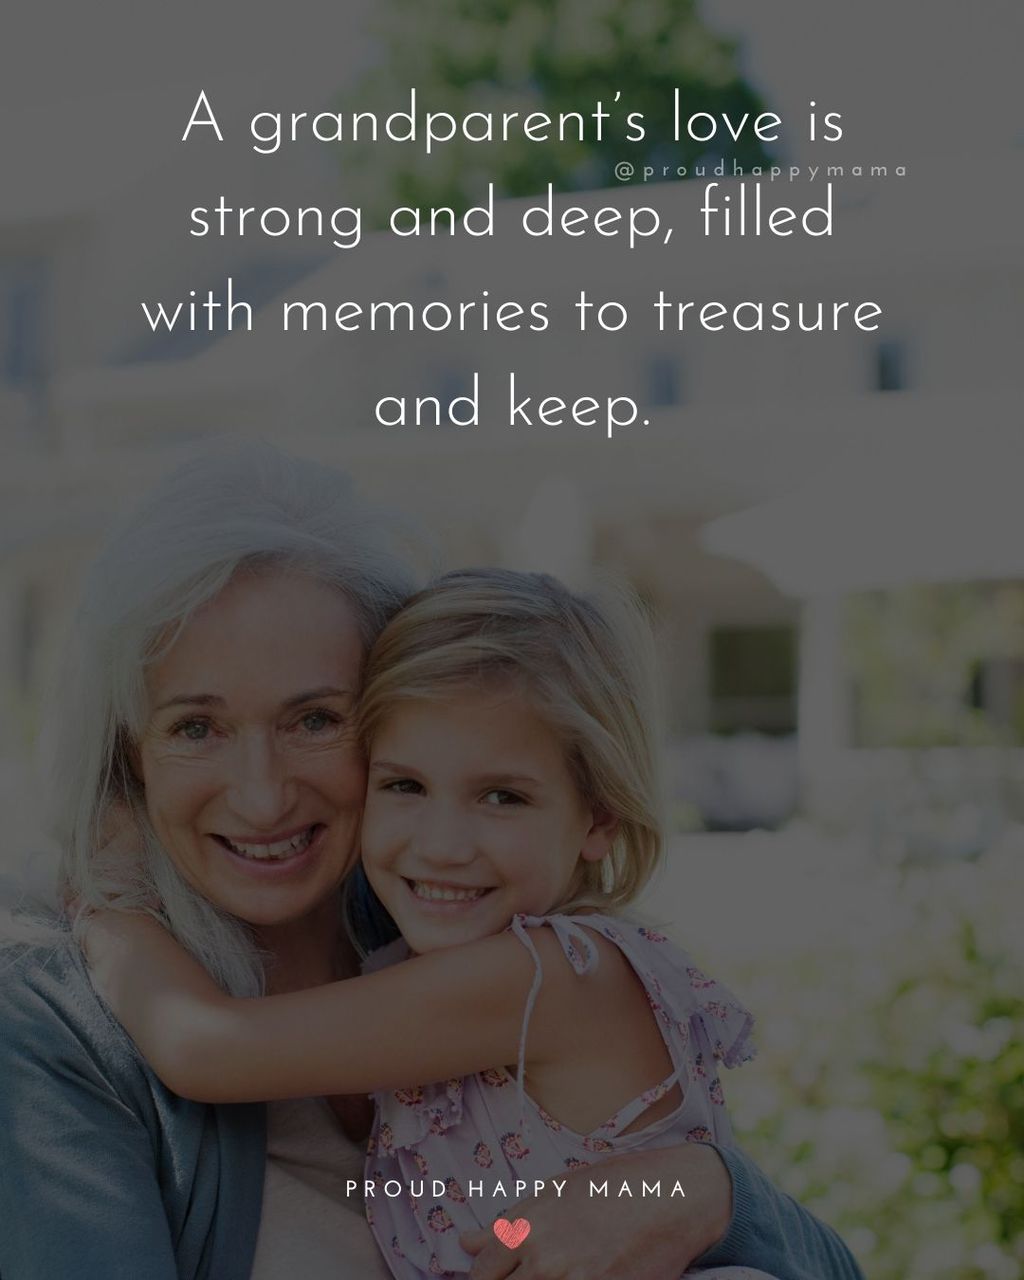 Grandparent Quotes About Grandchildren | A grandparent’s love is strong and deep, filled with memories to treasure and keep.